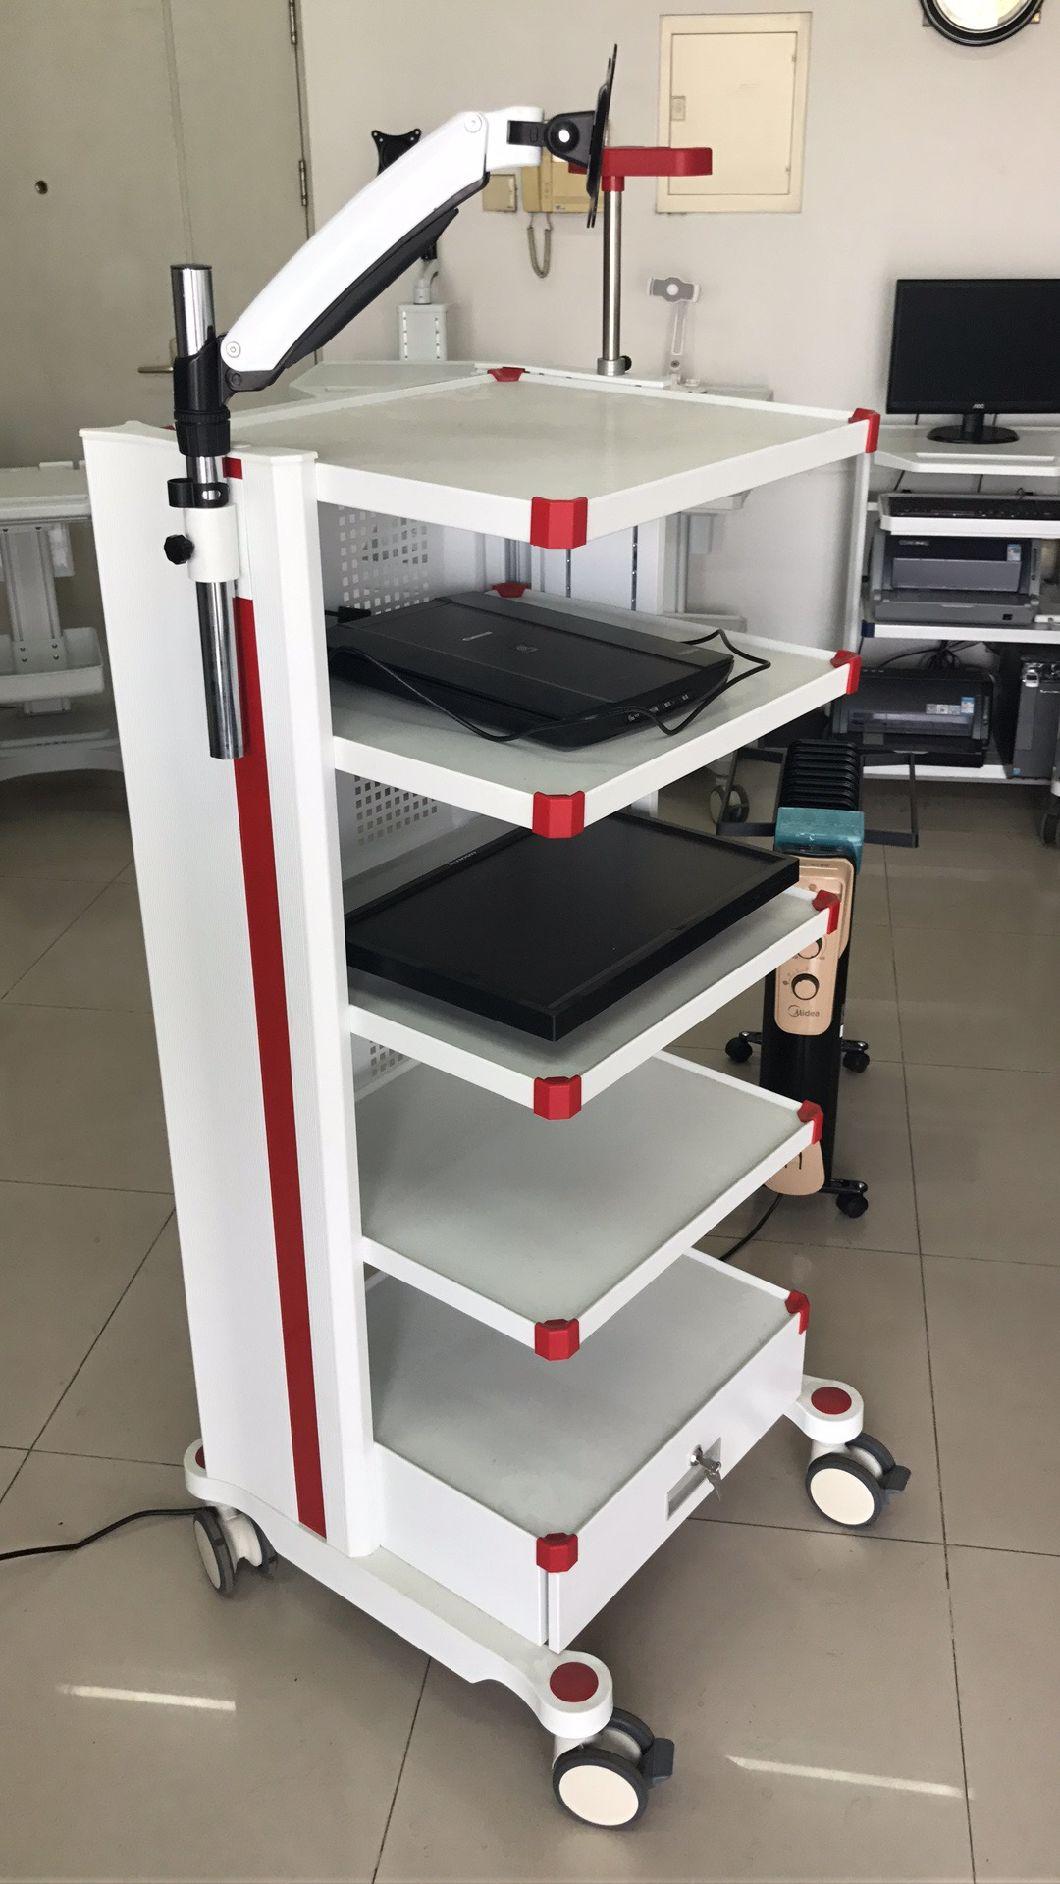 Hospital Medical All-in-One Mobile Computer Laptop Cart Equipment